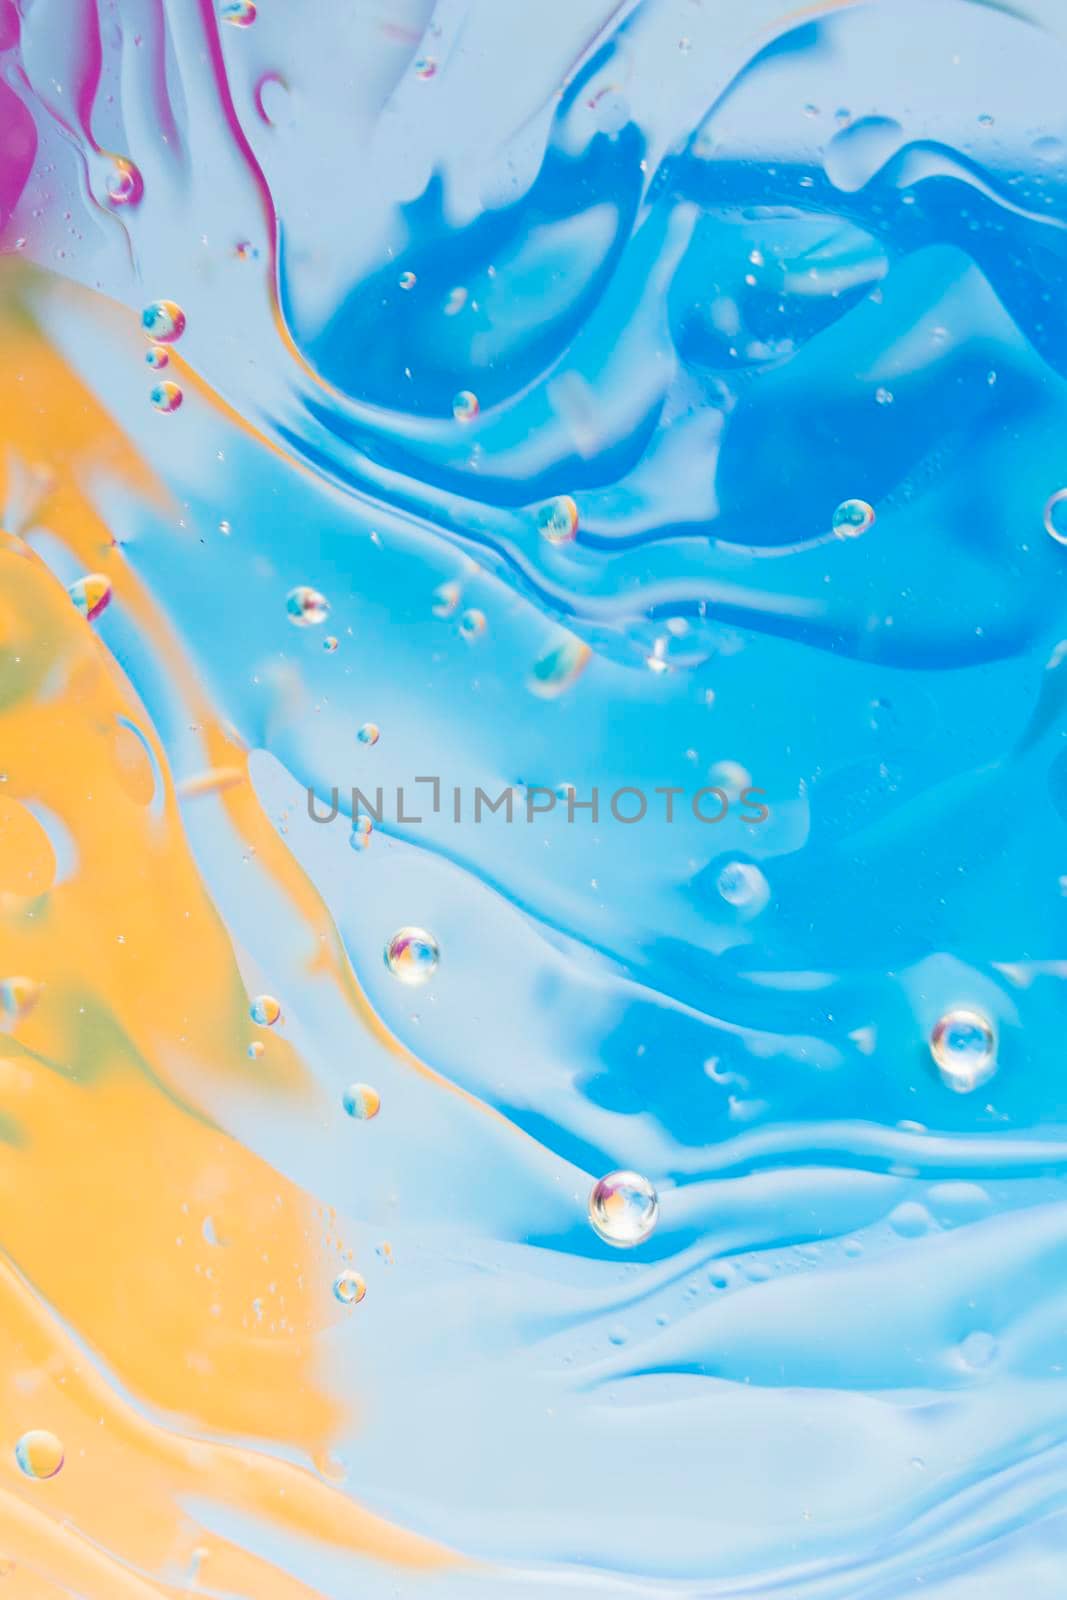 liquid effect blue yellow painted background. High quality photo by Zahard